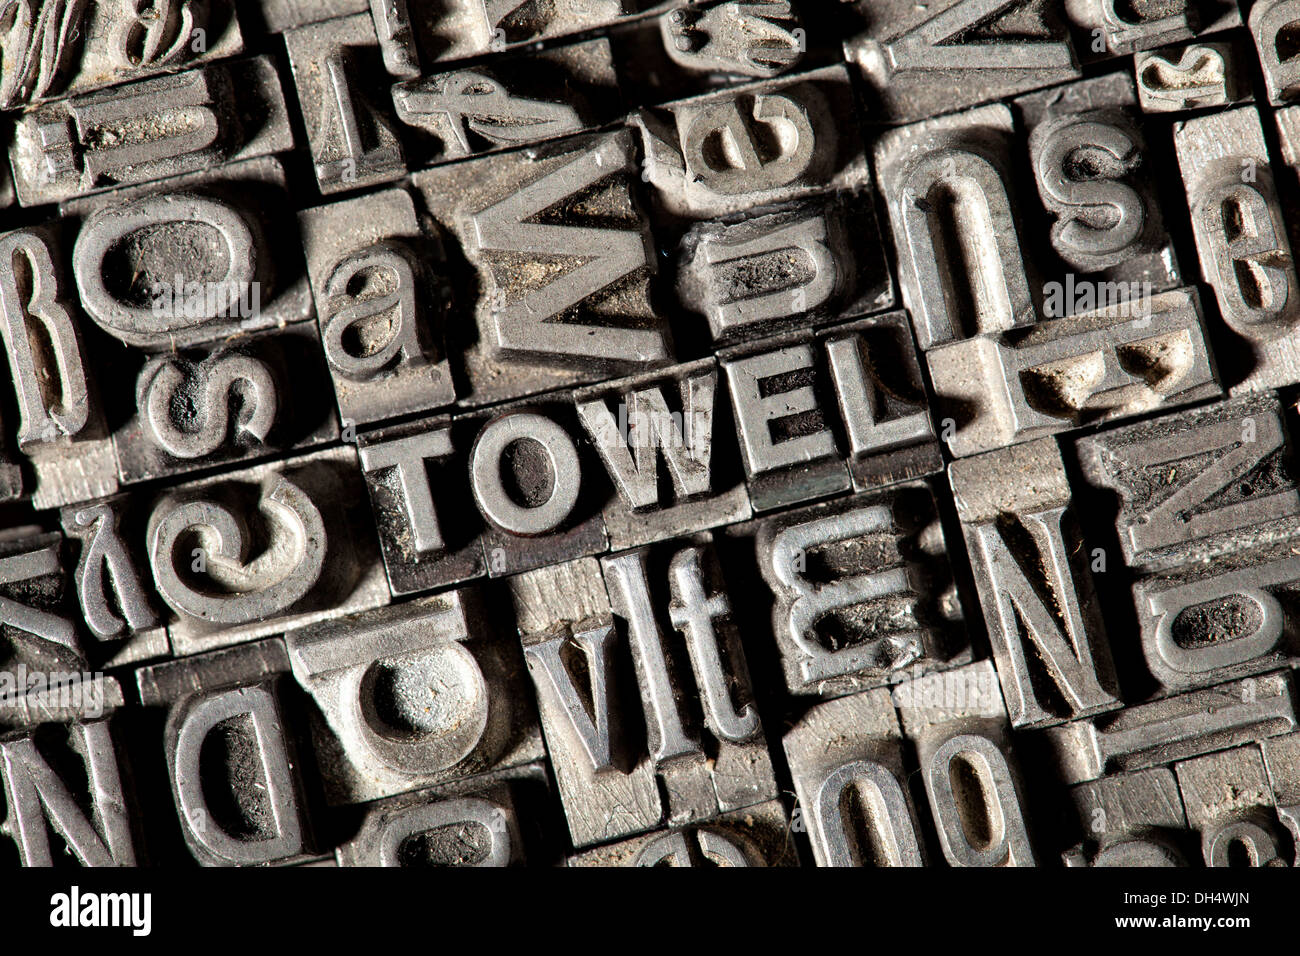 Old lead letters forming the word TOWEL Stock Photo